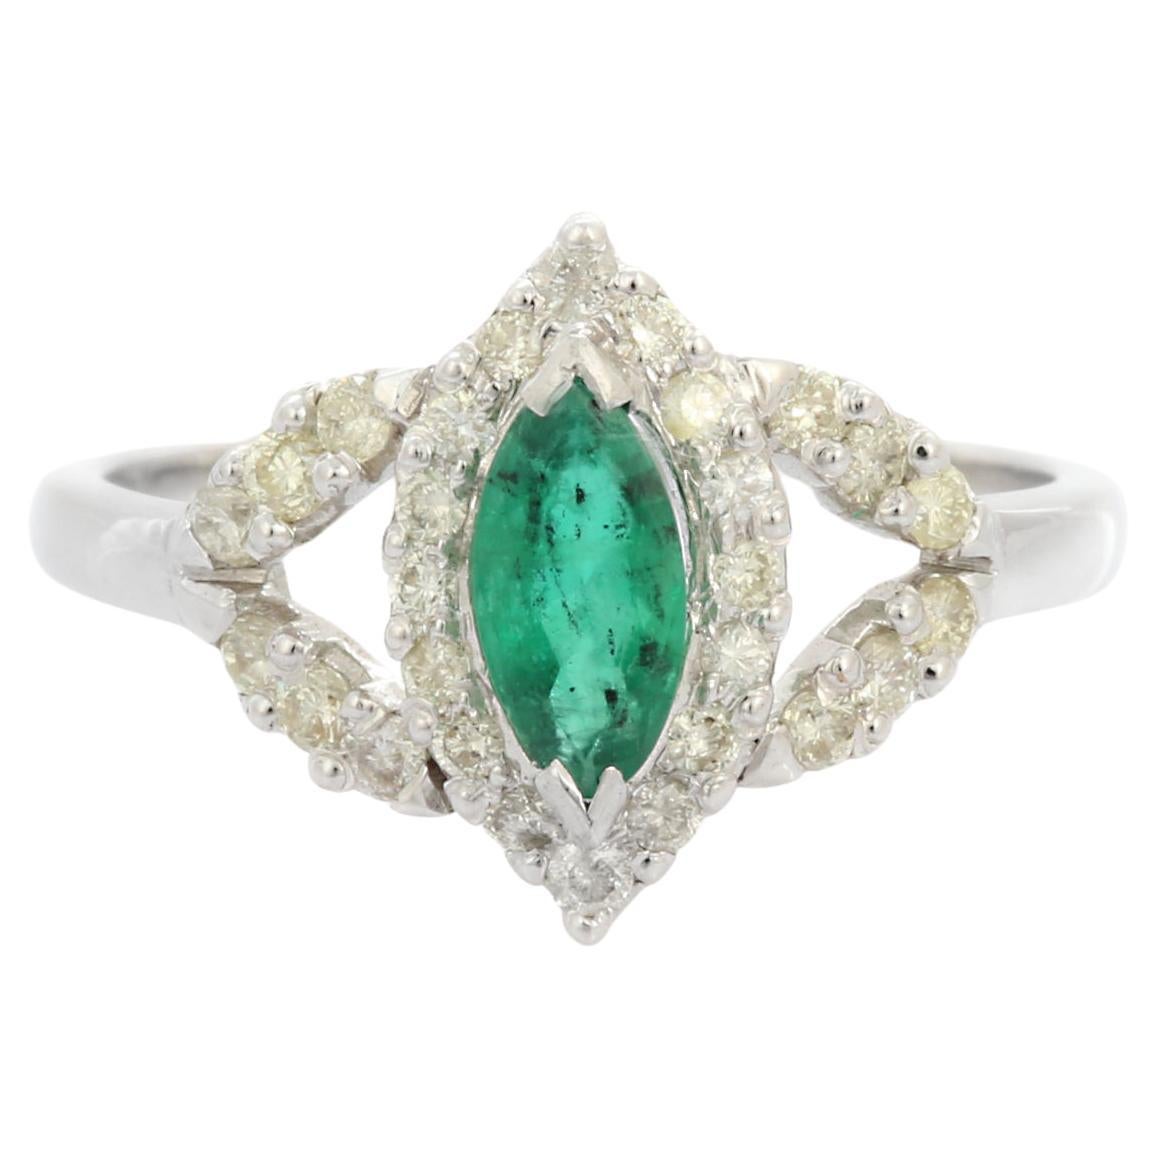 For Sale:  Natural Emerald Gemstone Wedding Ring with Diamonds in 18 Karat Solid White Gold